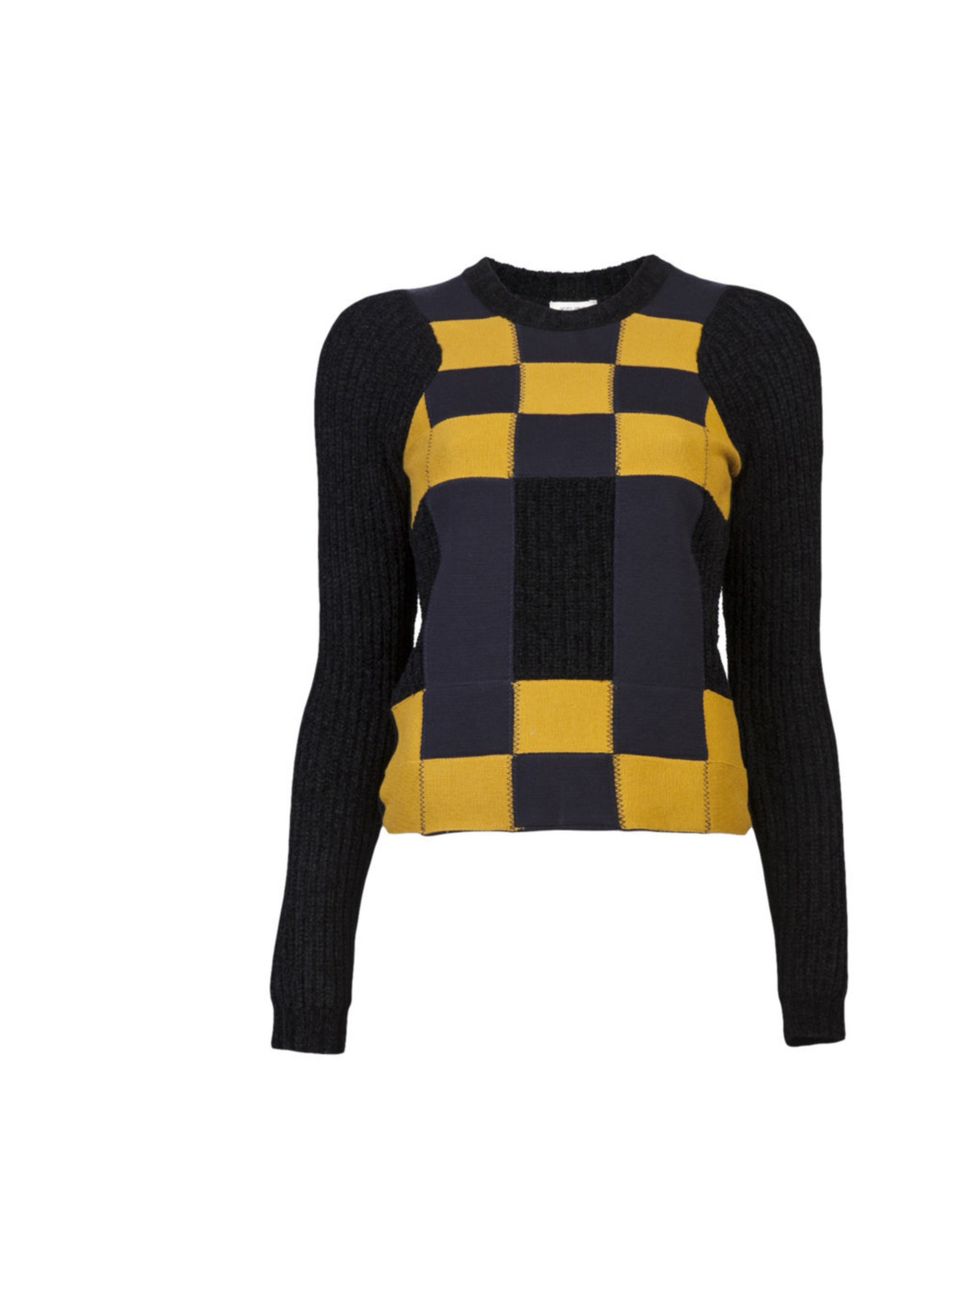 <p>Kenzo geometric jumper, £332.84, at Farfetch</p><p><a href="http://shopping.elleuk.com/browse?fts=kenzo+long+sleeve+sweater">BUY NOW</a></p>